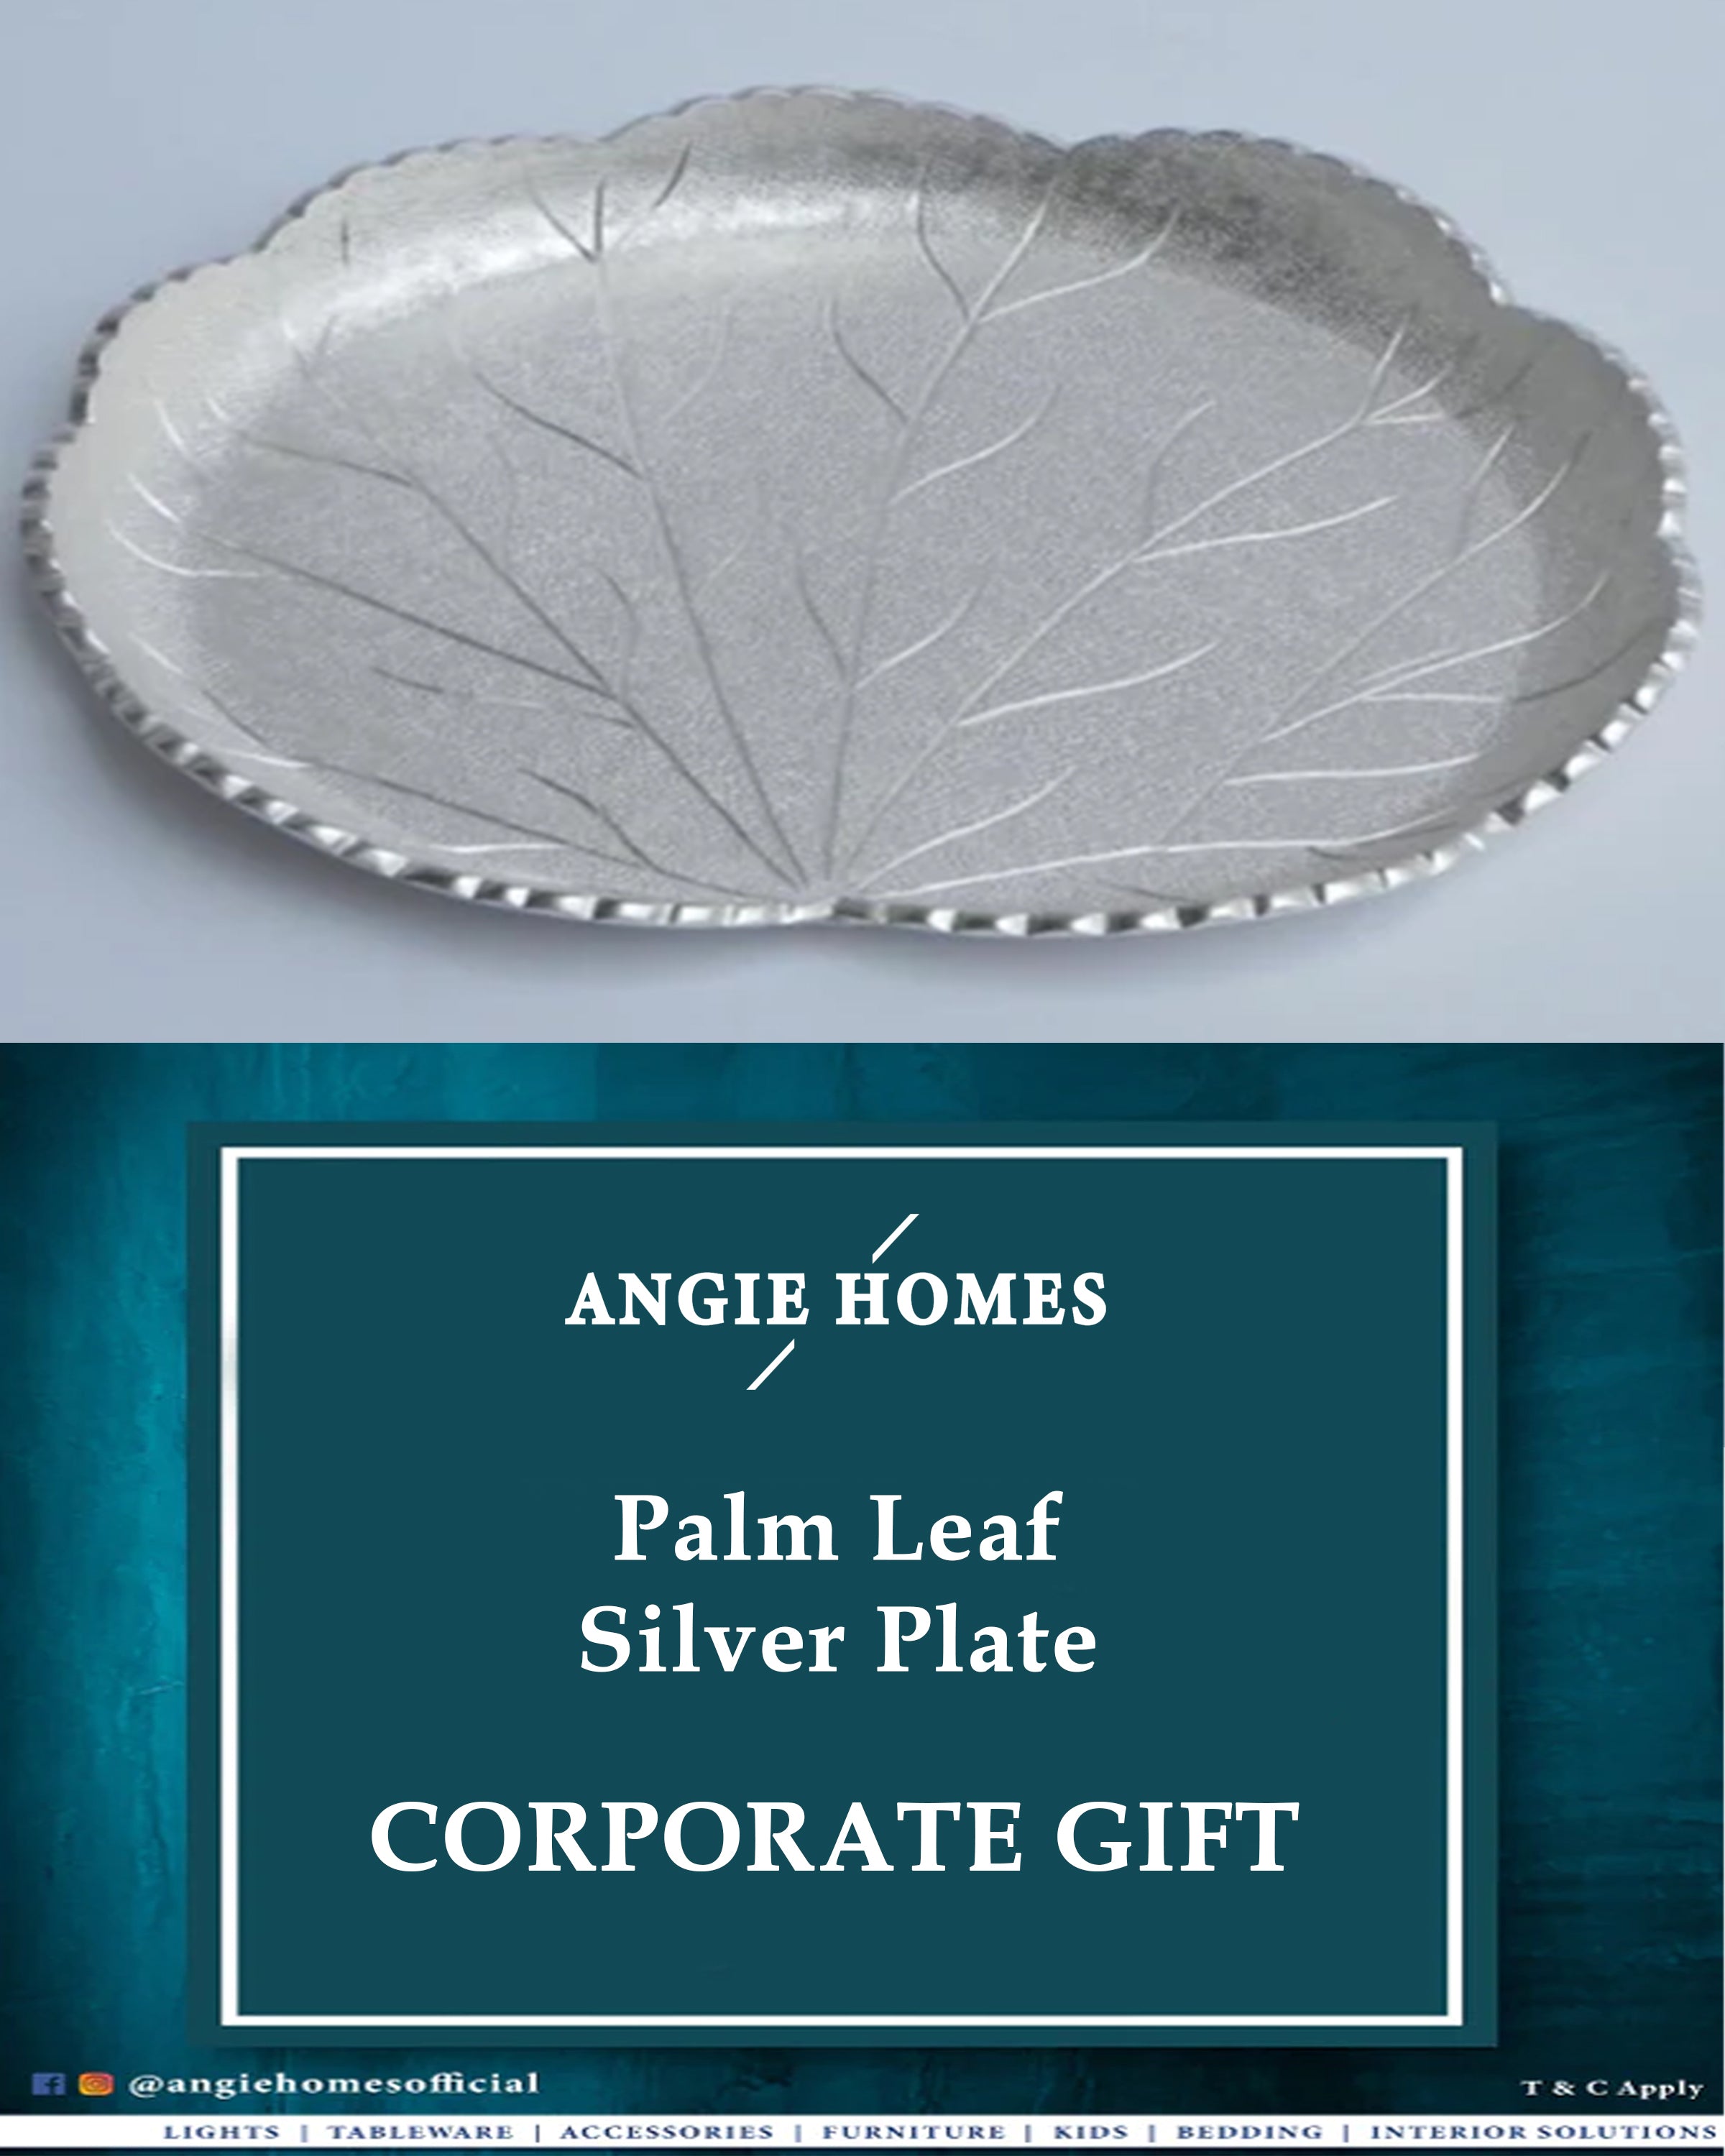 Palm Leaf Silver Plate for Wedding, House Warming & Corporate Gift ANGIE HOMES